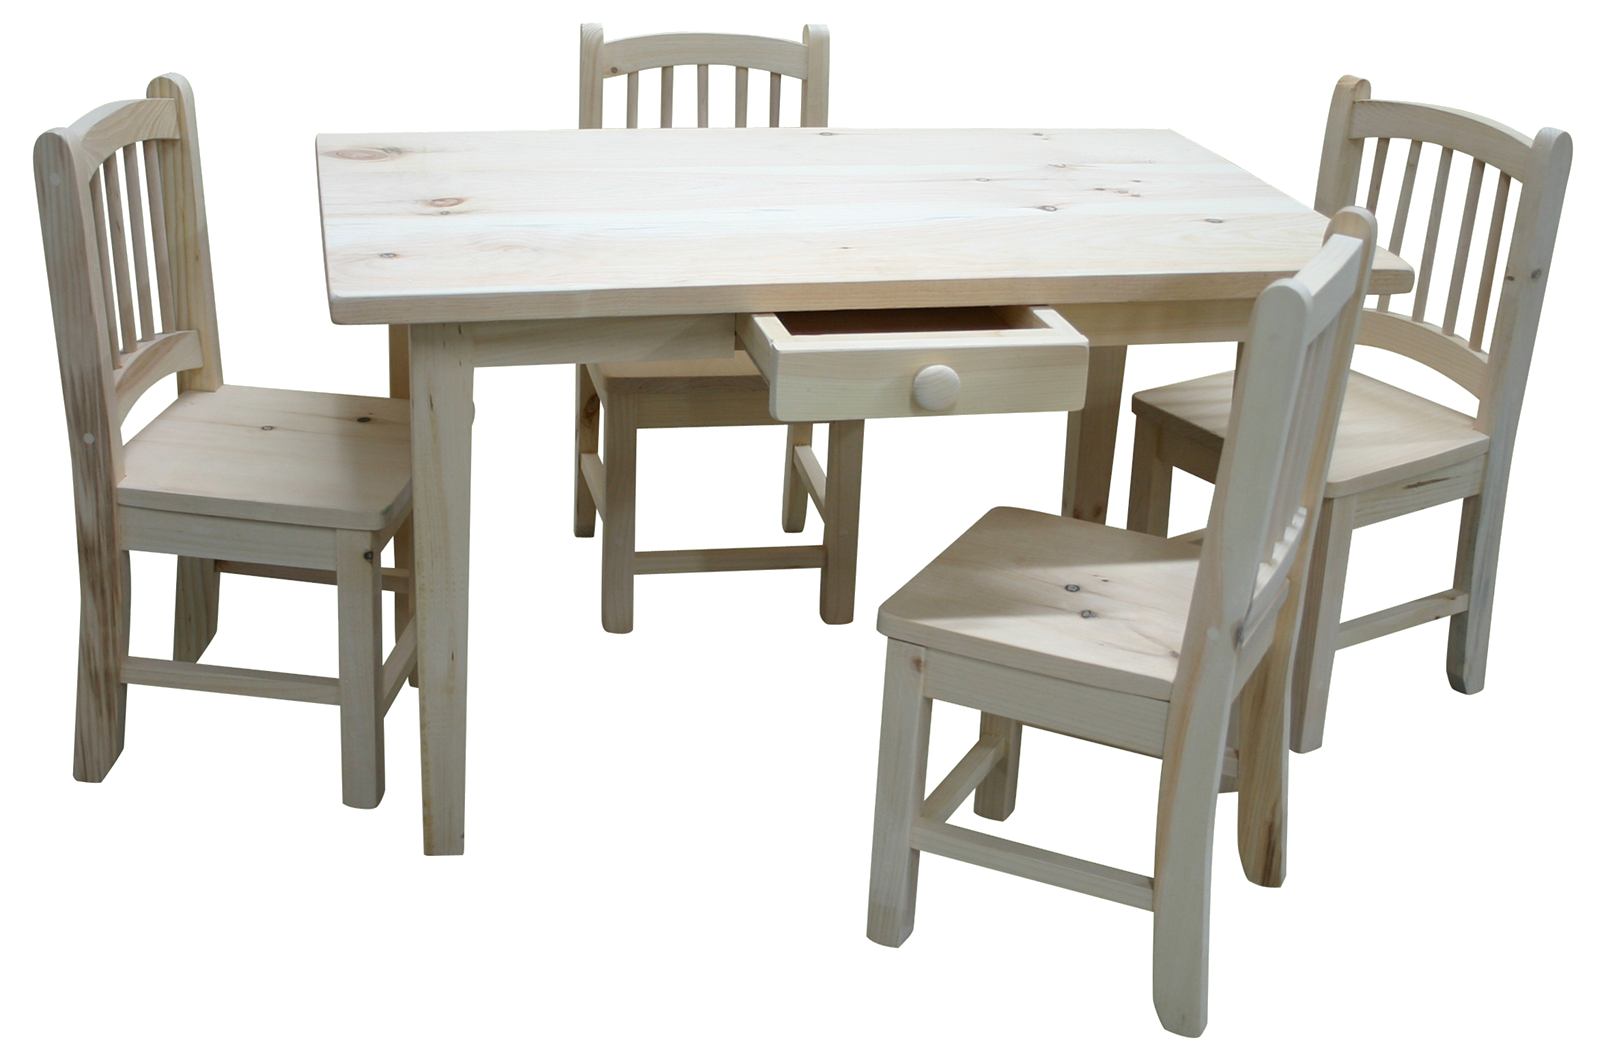 Rustic Kids Table with Chairs